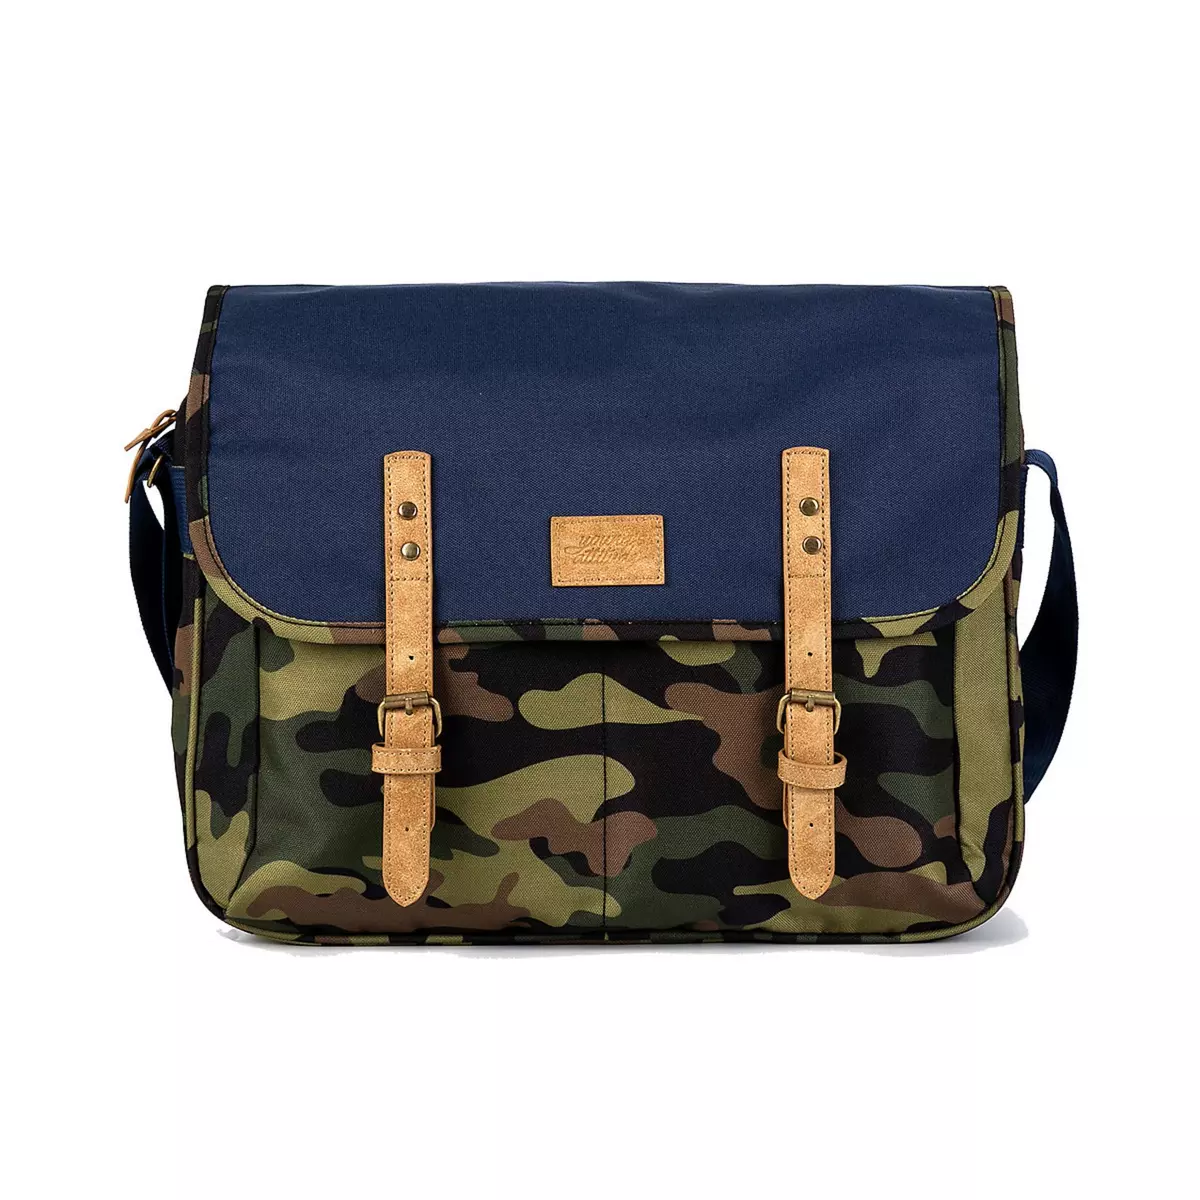 AUCHAN Sac besace camouflage YOUNG'S ATTITUDE